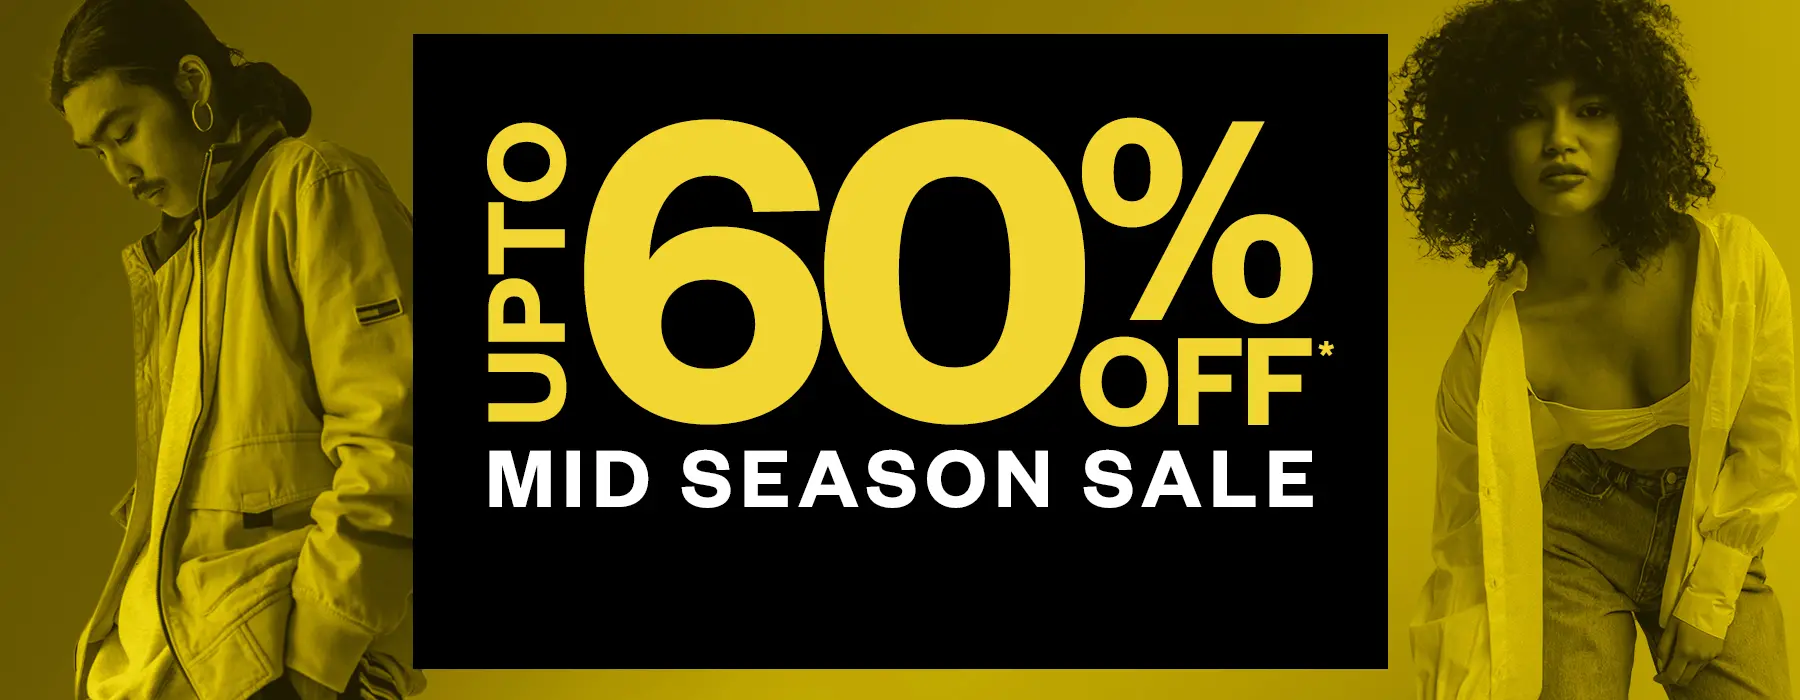 Up to 60% OFF plus take further 25% OFF on Mid Season sale styles